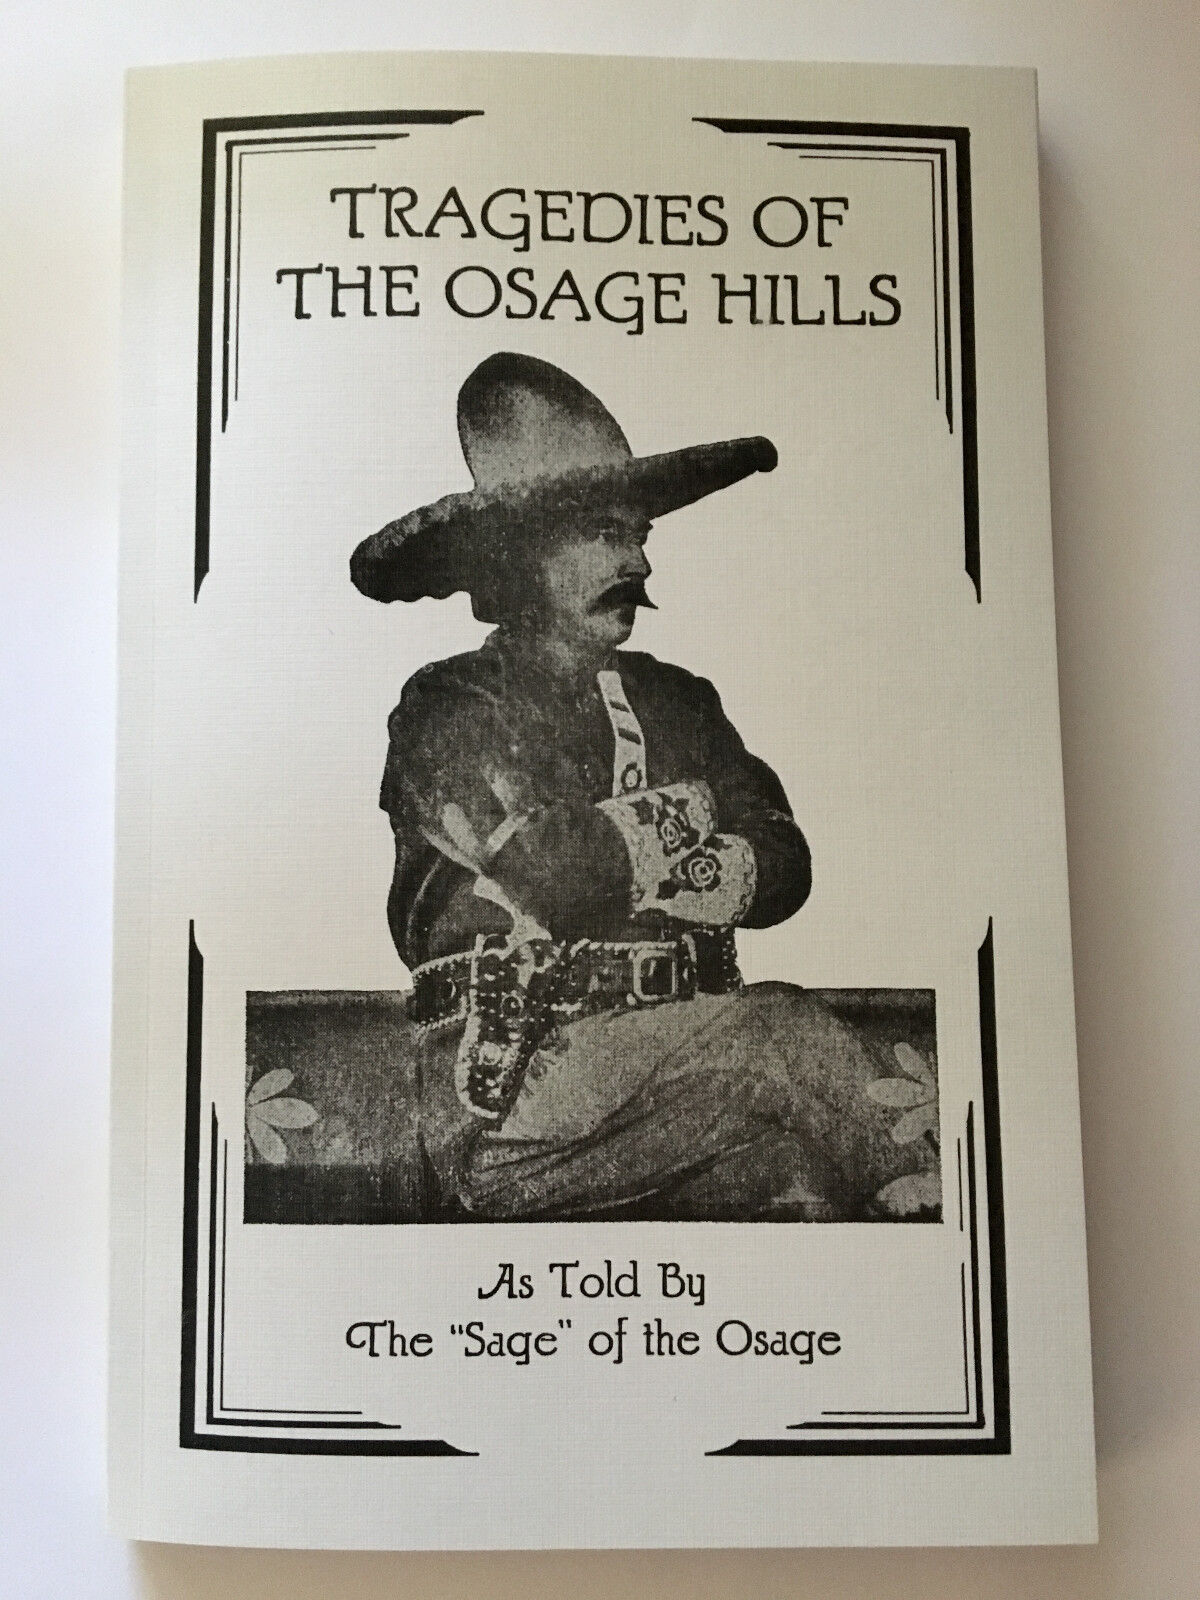 “TRAGEDIES OF THE OSAGE HILLS” - Indians, outlaws, the wild west, by Arthur Lamb